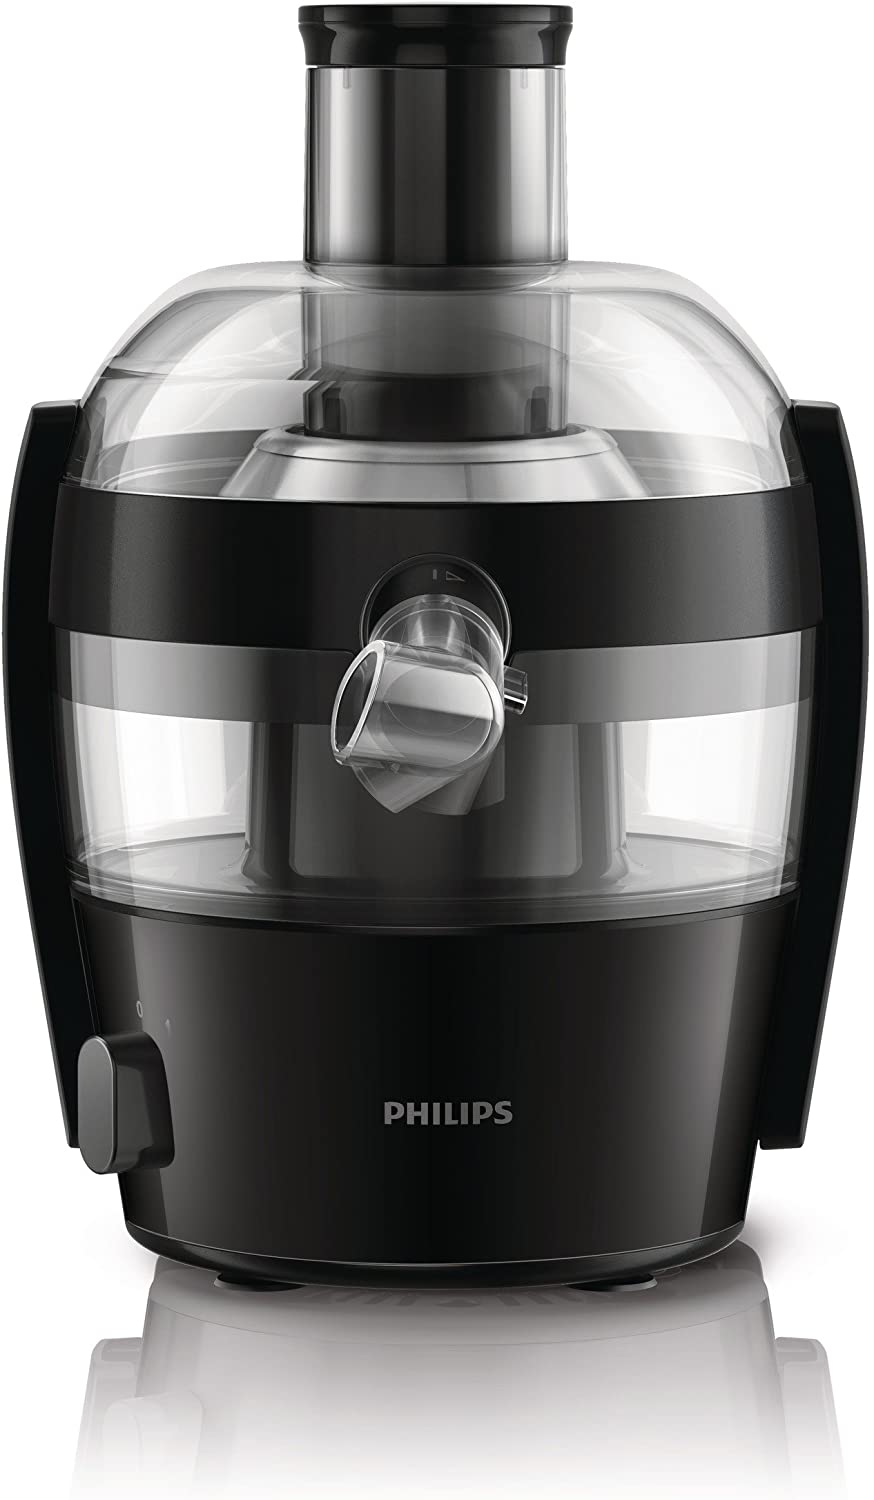 Philips Domestic Appliances Philips HR1832 / 00 Viva Collection Juicer 500 W, compact design, 1.5 L in one go, fast cleaning, black